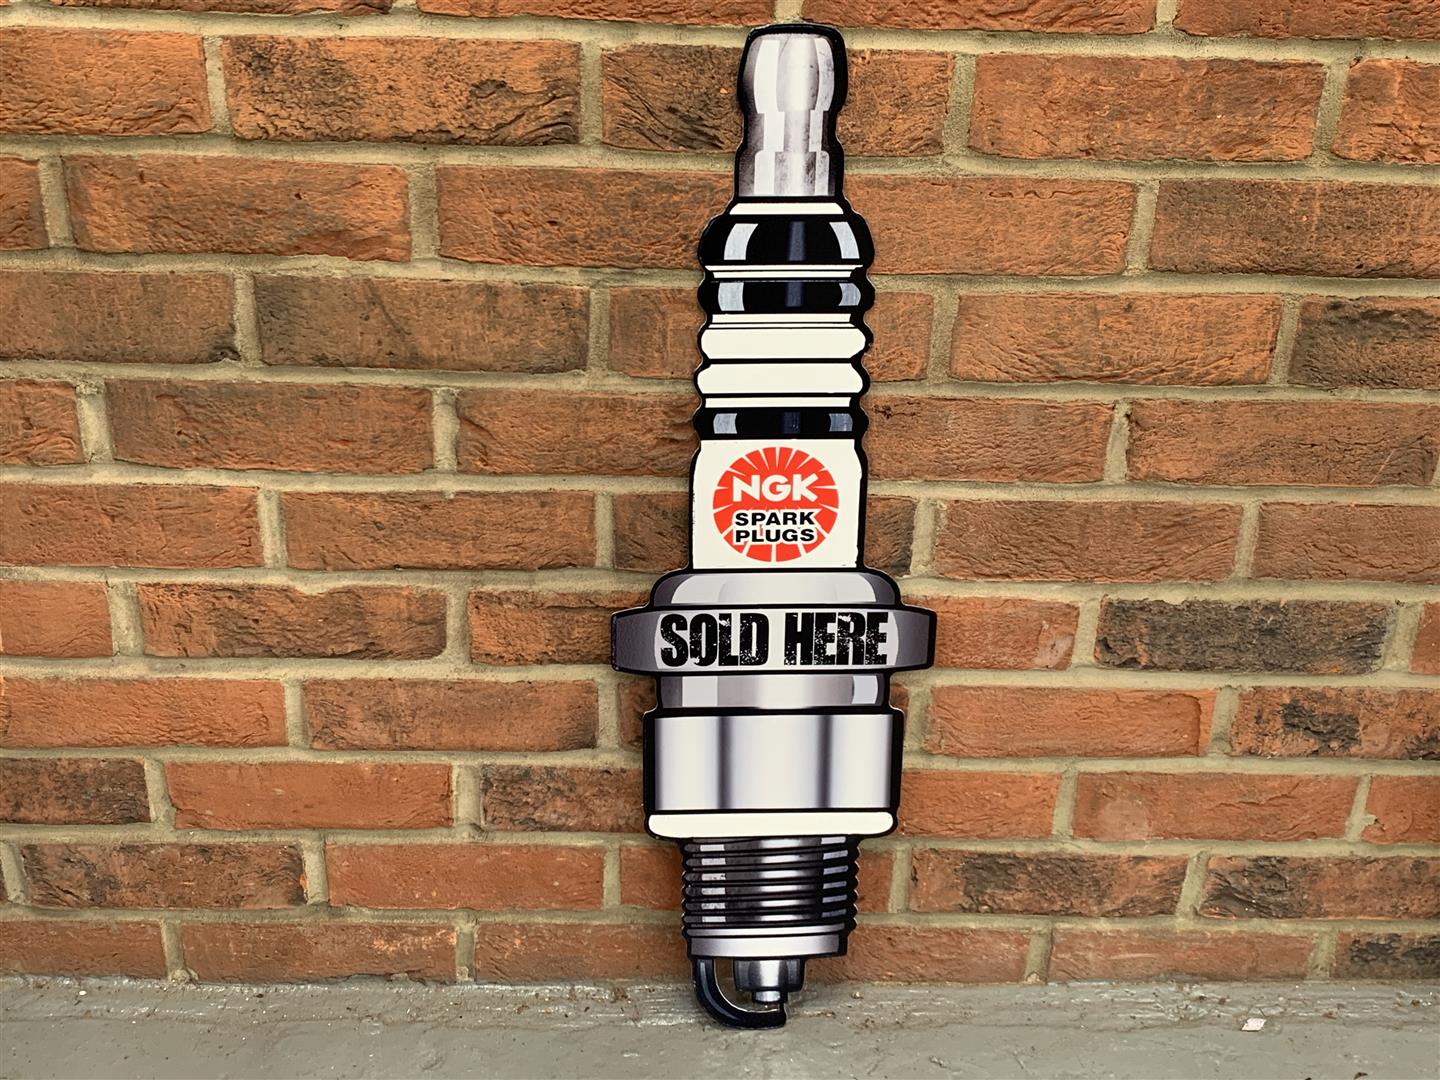 Metal NGK Spark Plugs Sold Here " Sign"